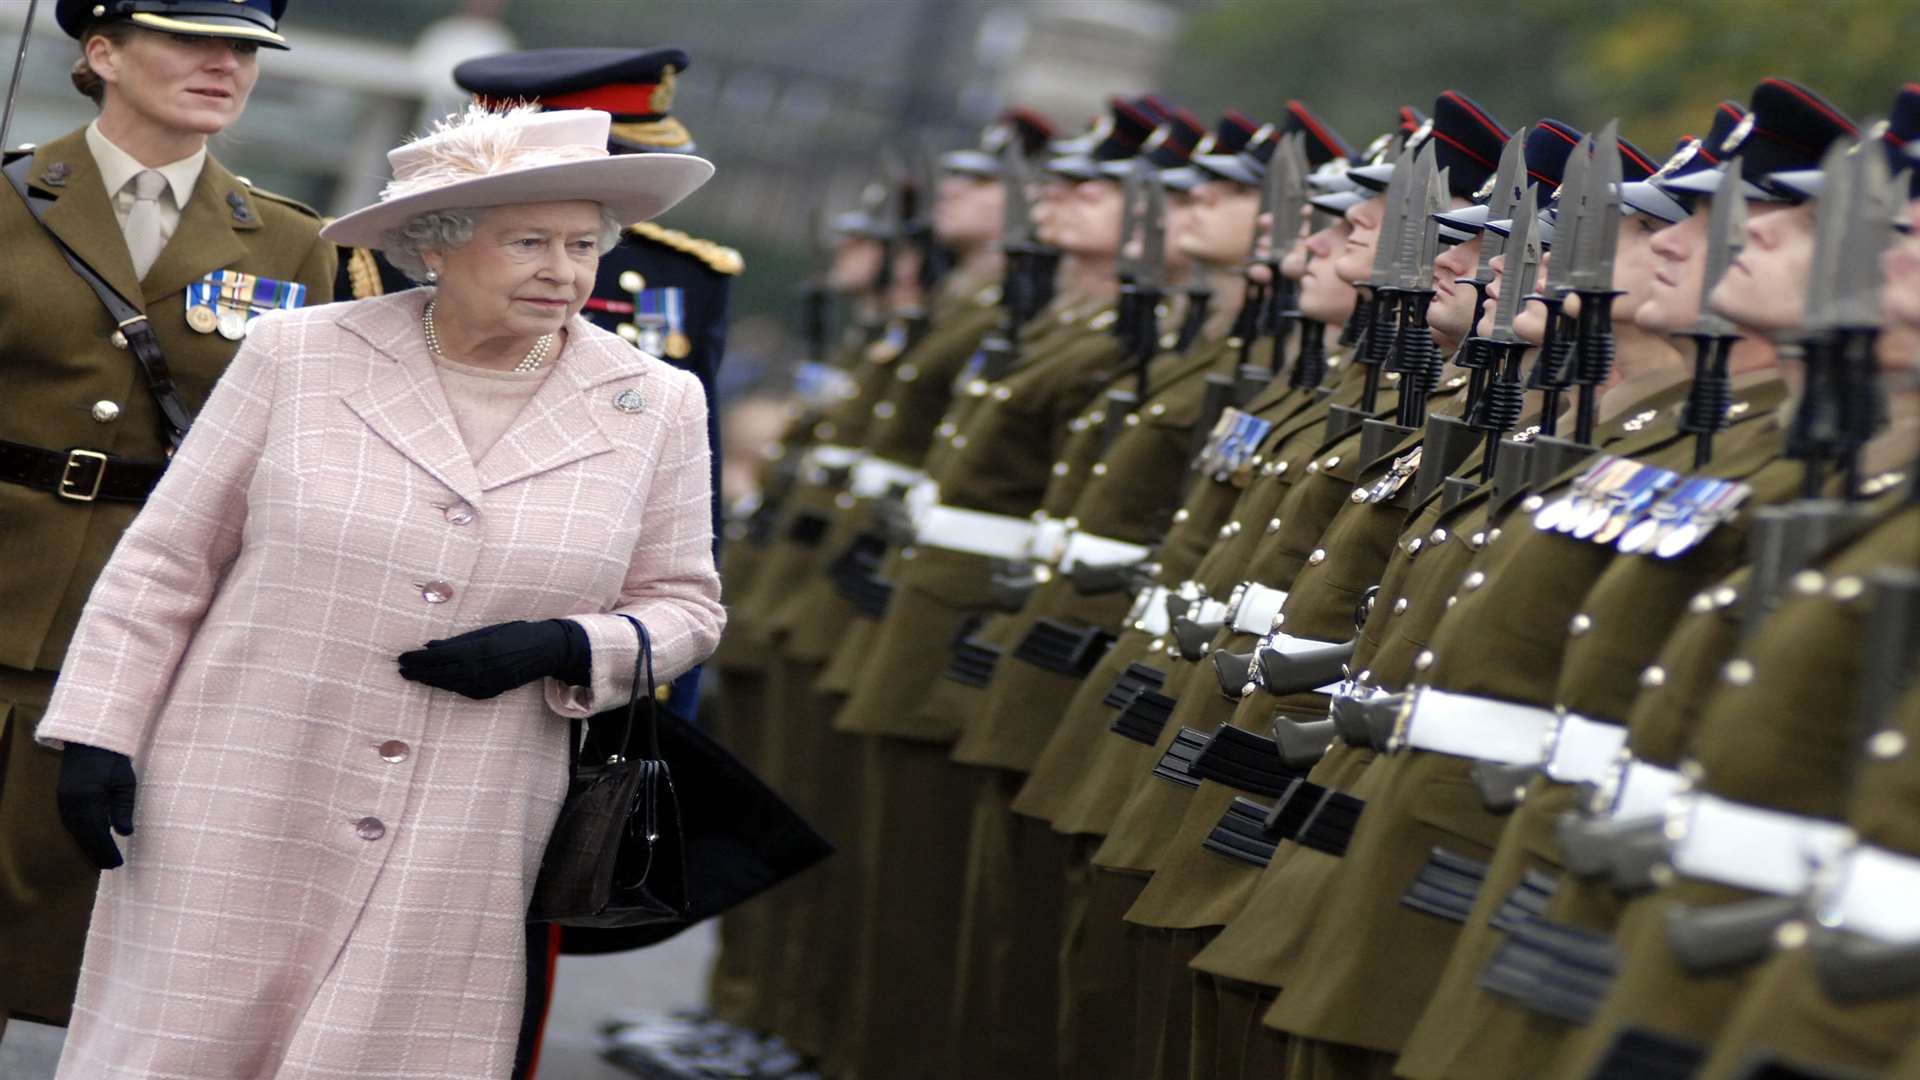 The Queen Visits Brompton Barracks Gillingham to meet the Corps of the Royal Engineers in 2007